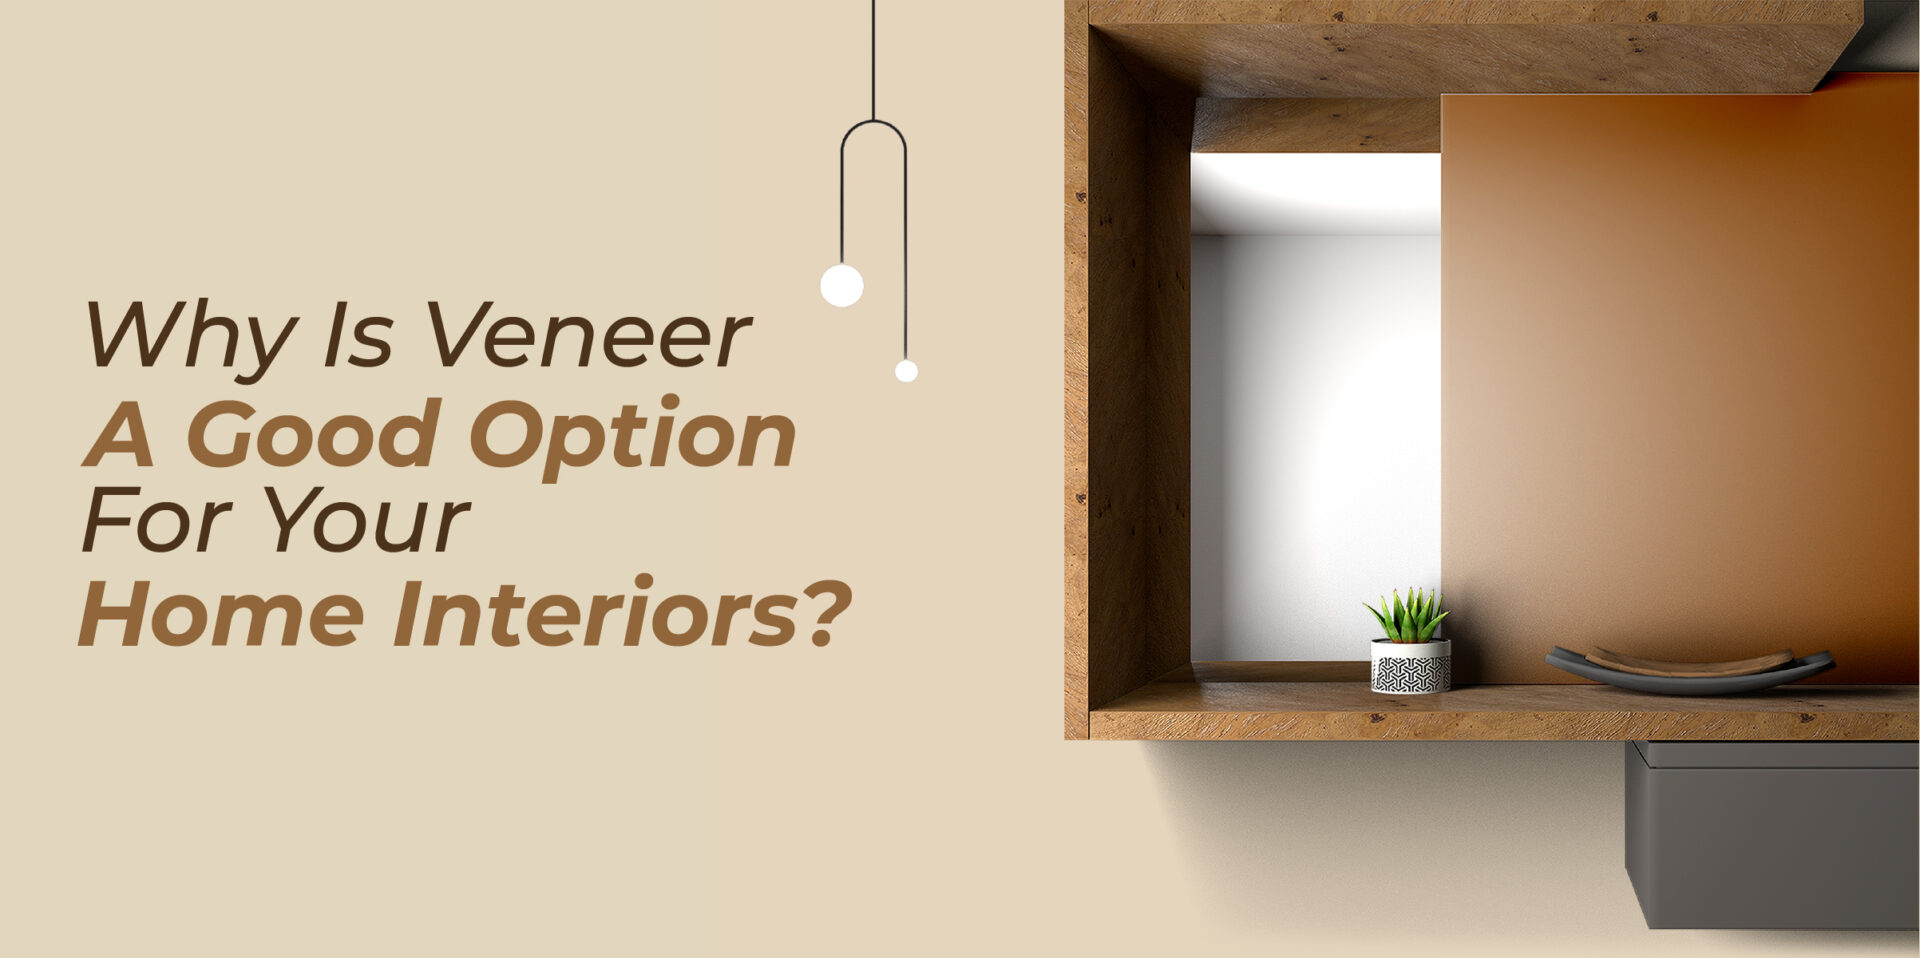 Why is Veneer a Good Option for Your Home Interiors?